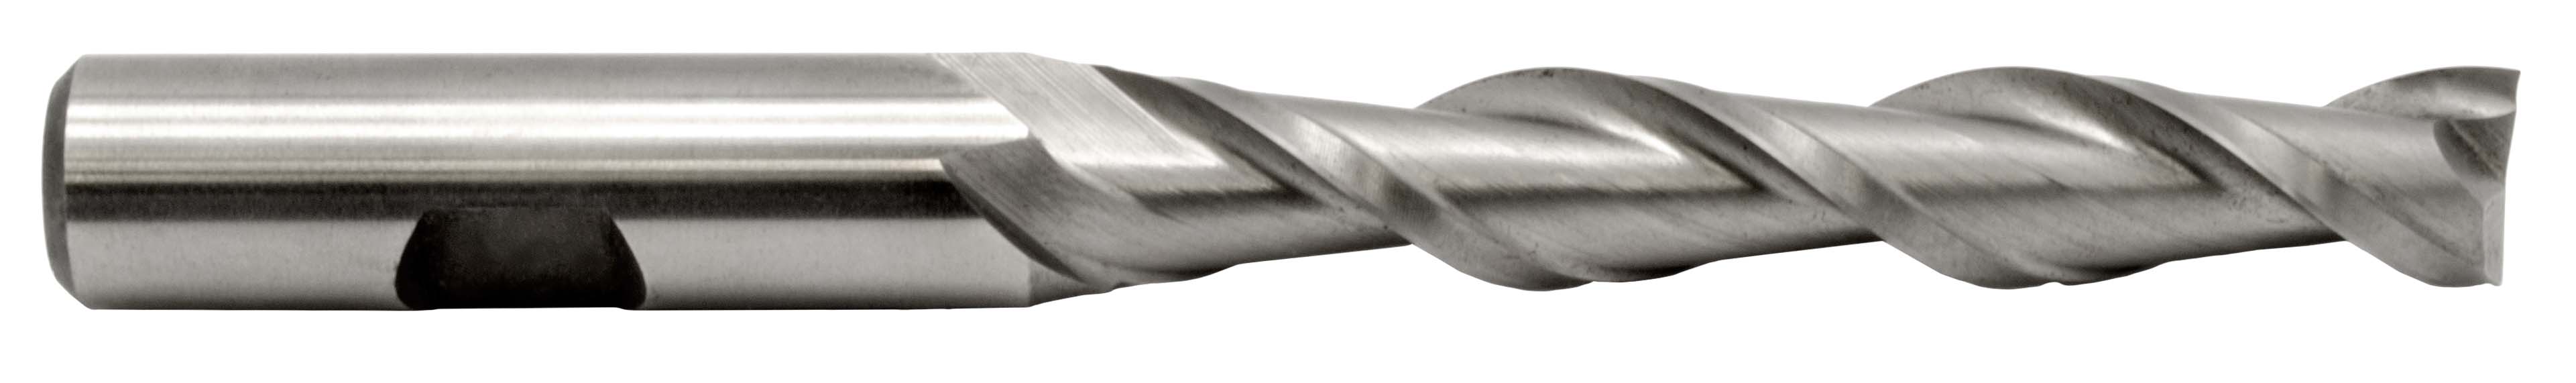 Extra Long Flute Length High Helix End Mills for Aluminum